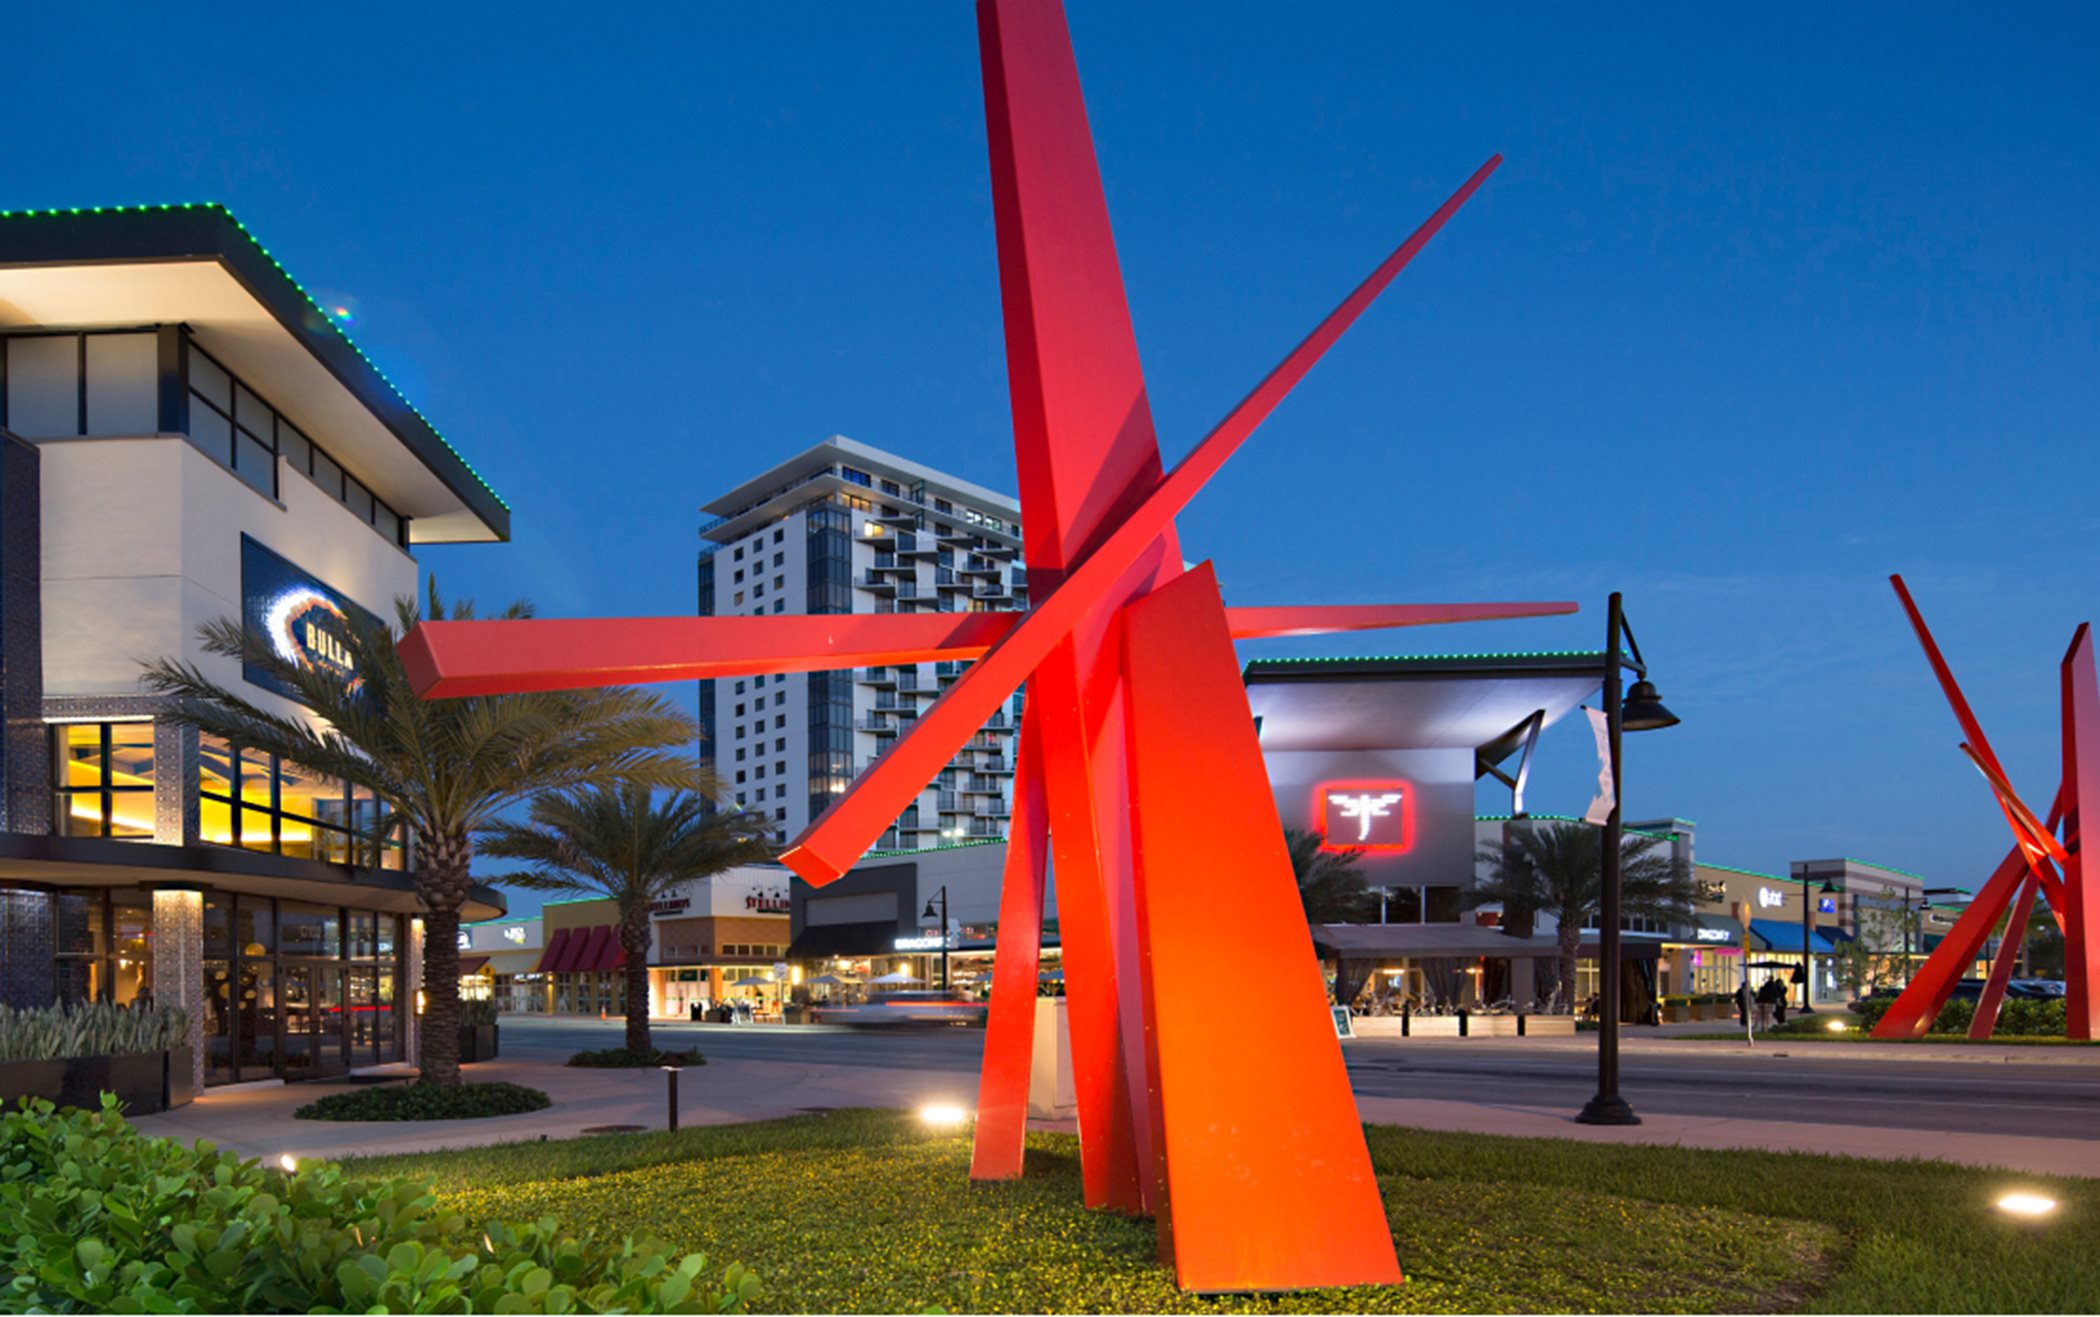 Iconic art sculpture in Doral 